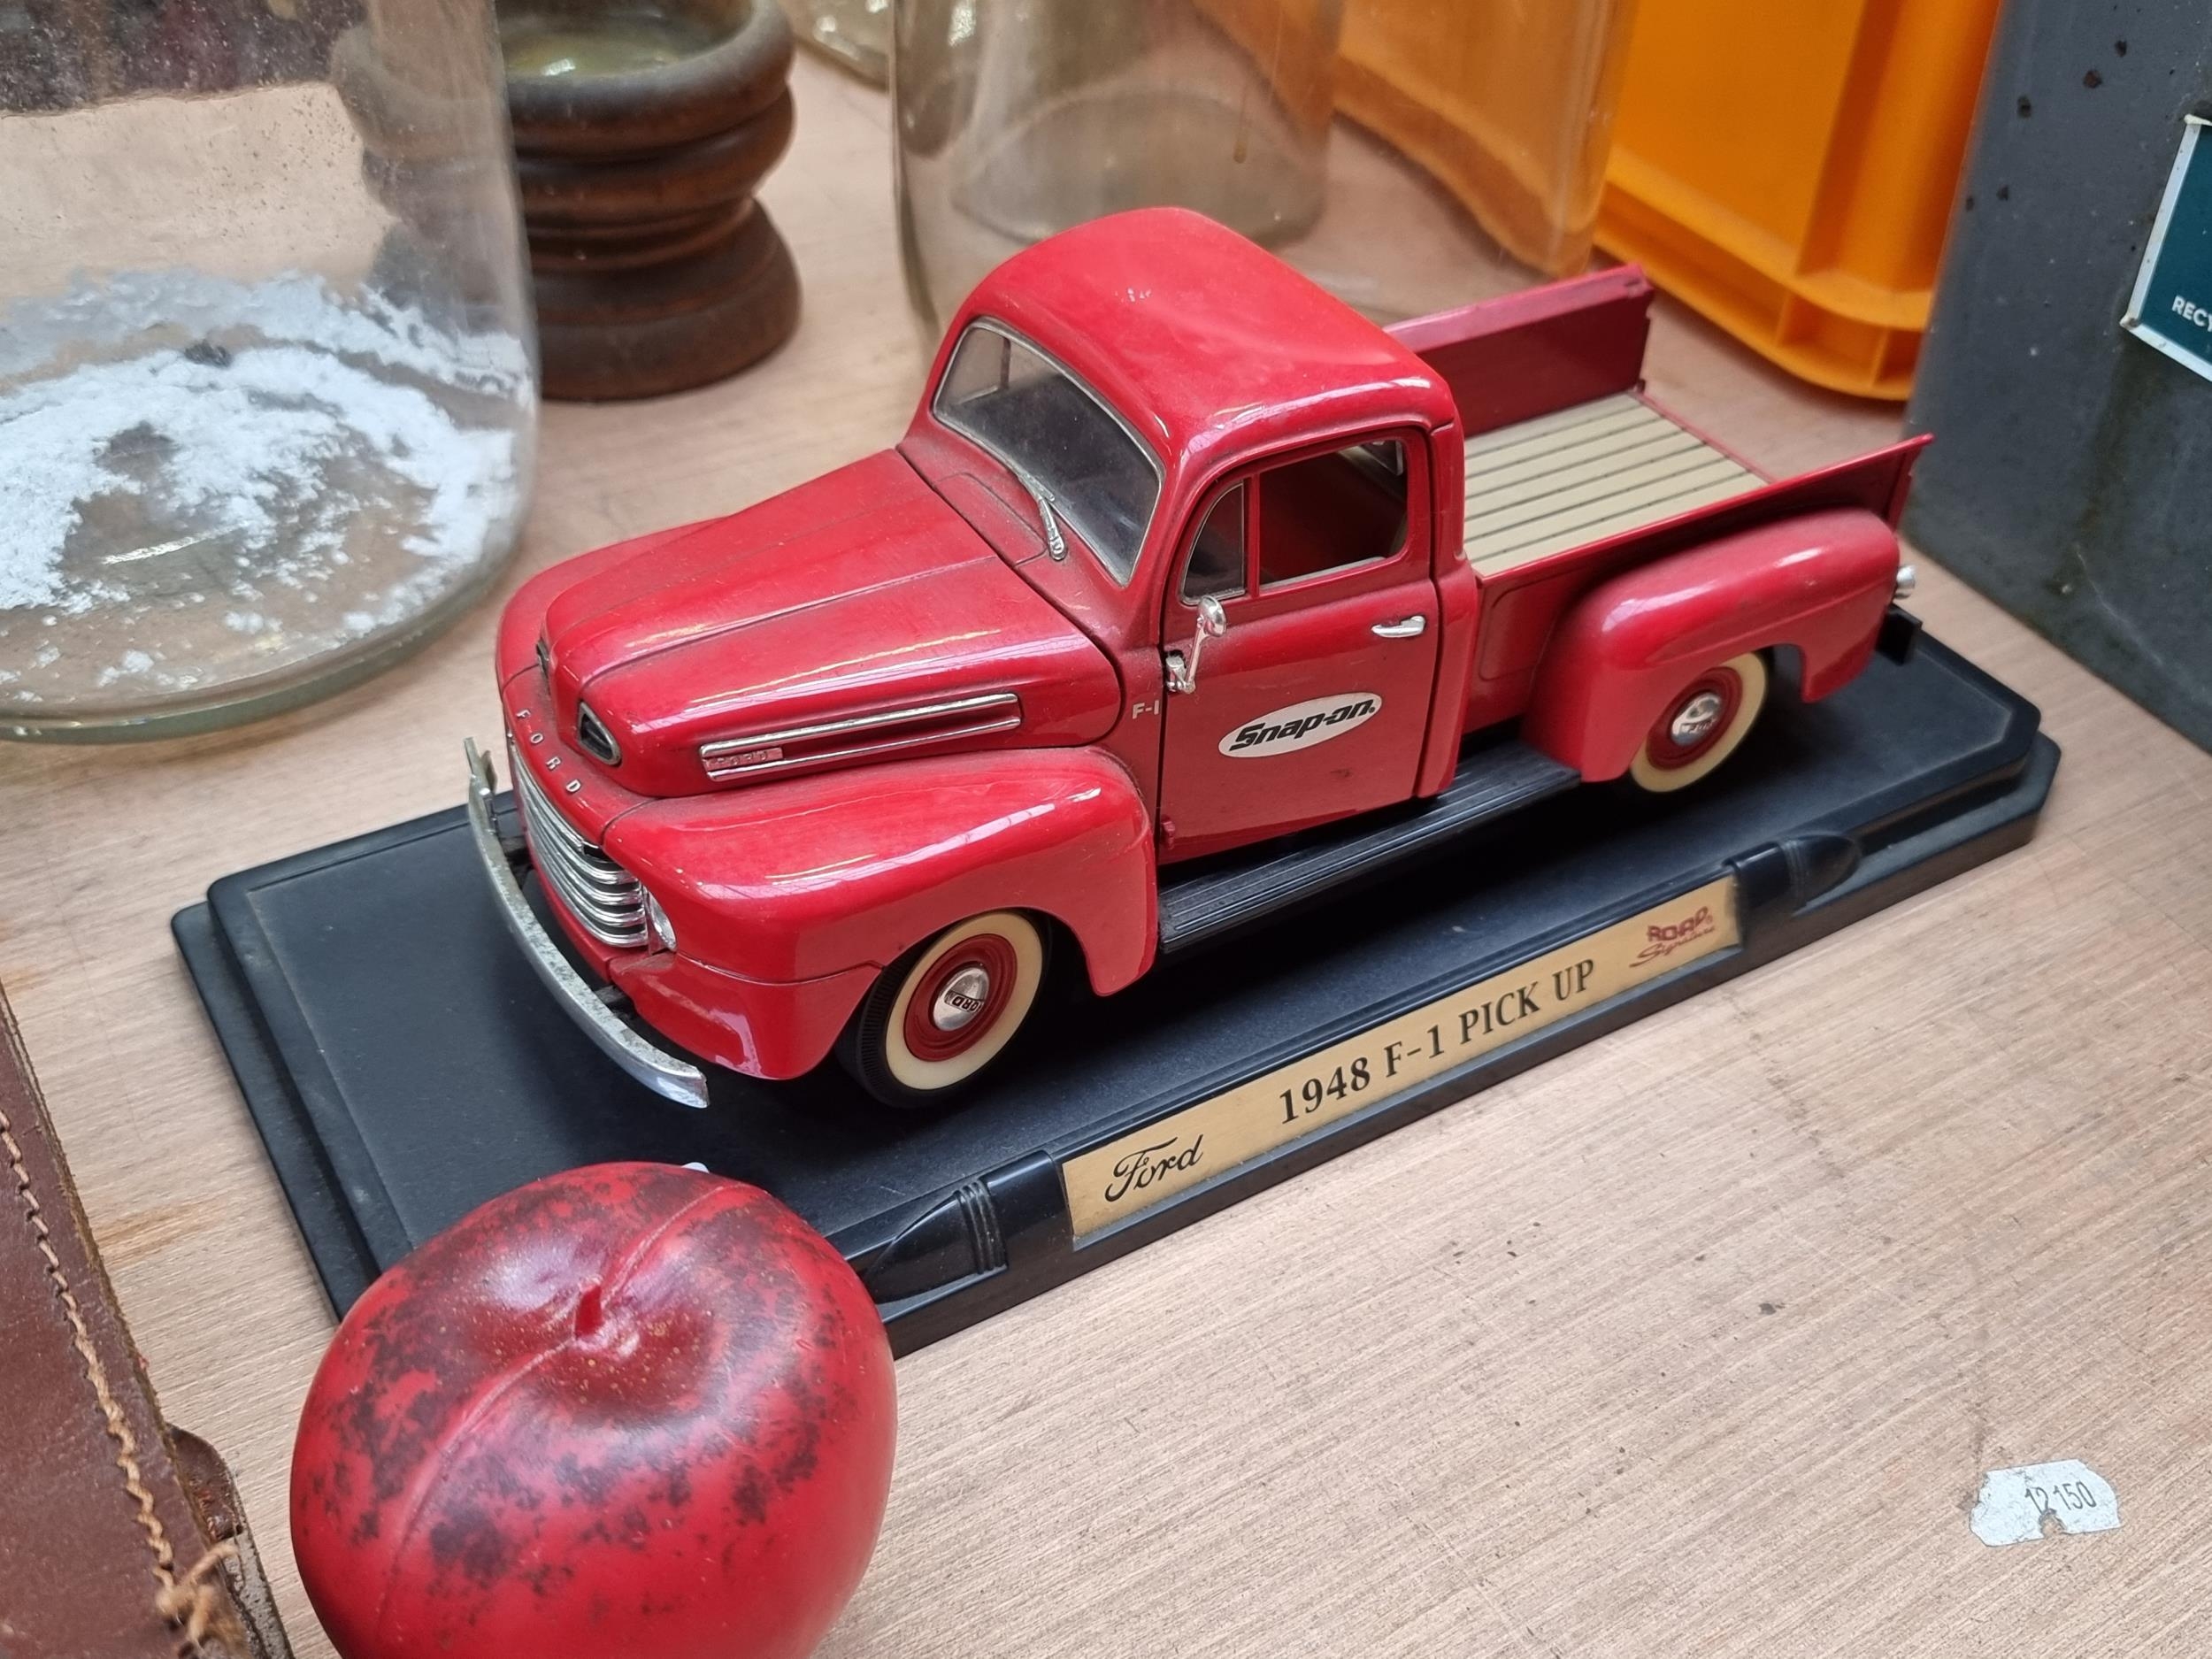 A large super diecast Snap-on Ford 1948 F-1 Pickup Truck in a 